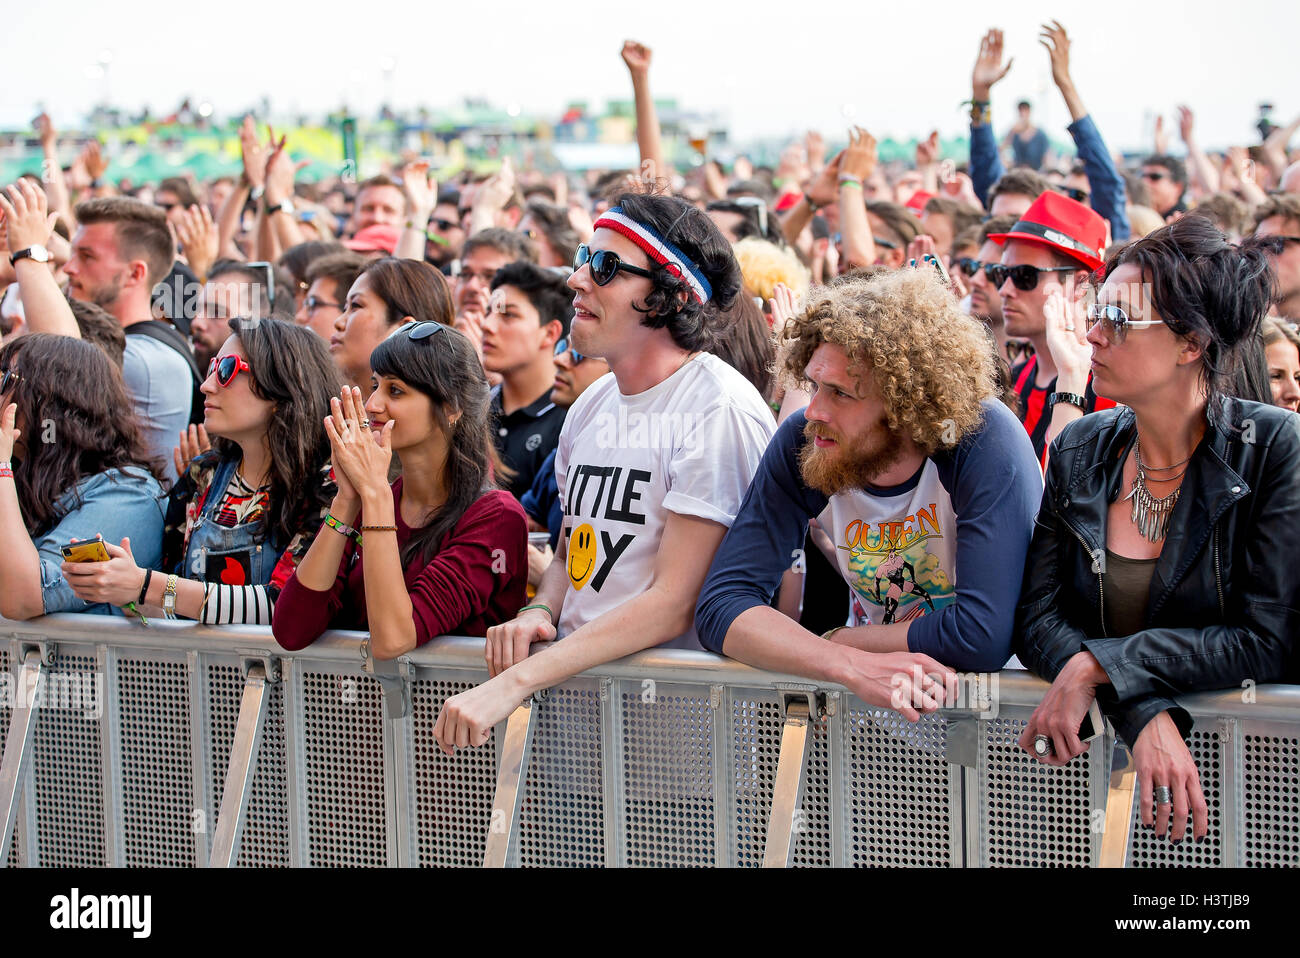 BARCELONA - MAY 29: People at Primavera Sound 2015 Festival on May 29, 2015 in Barcelona, Spain. Stock Photo